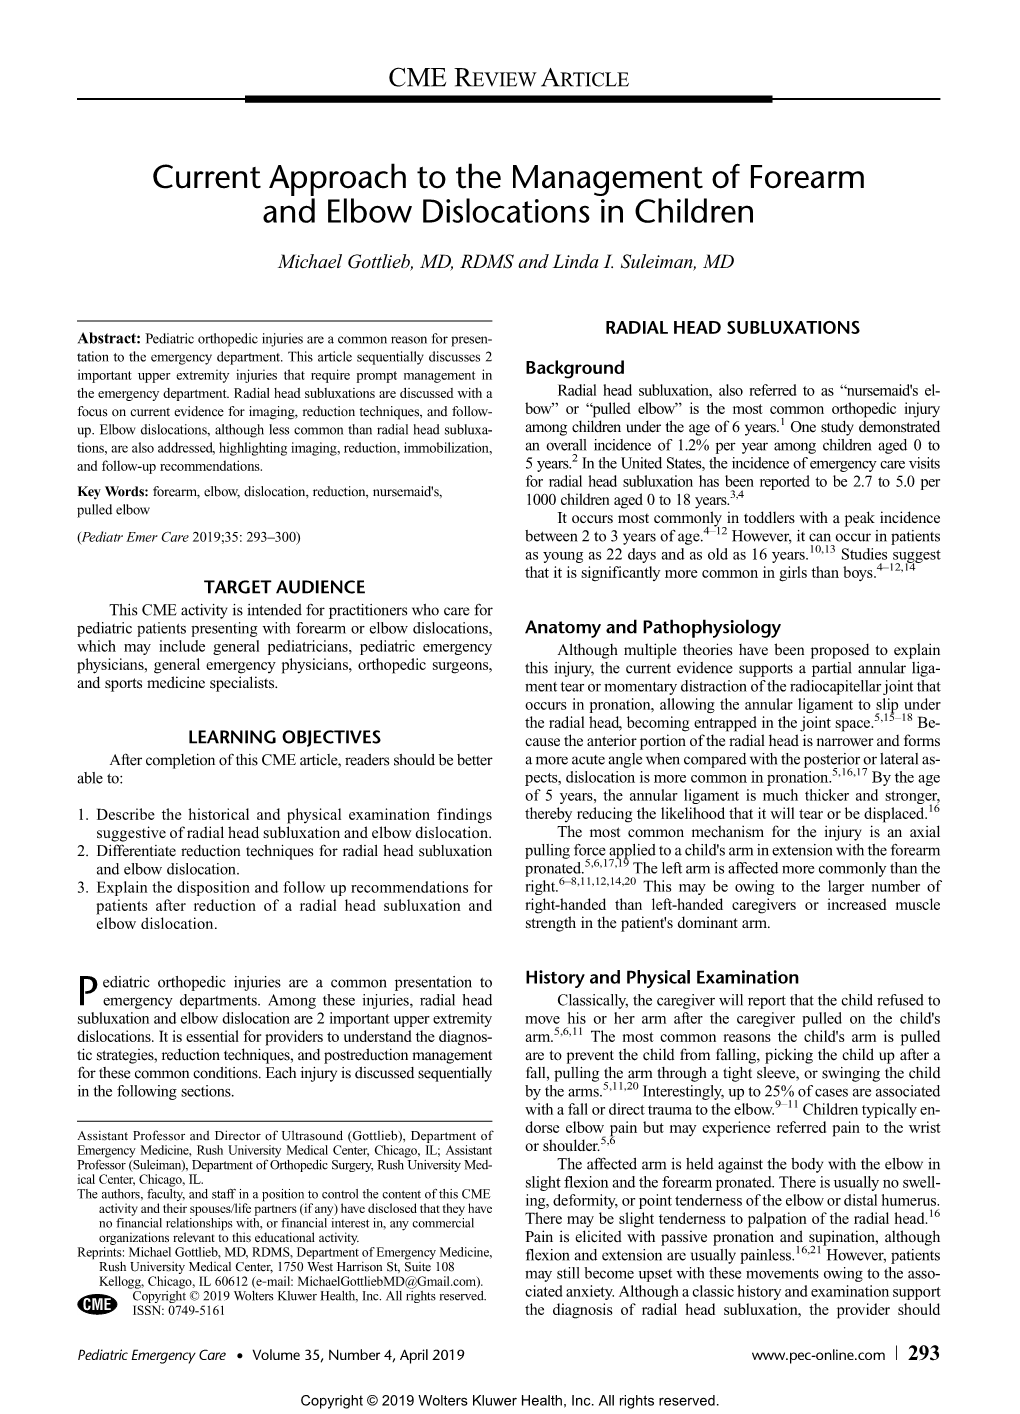 Current Approach to the Management of Forearm and Elbow Dislocations in Children